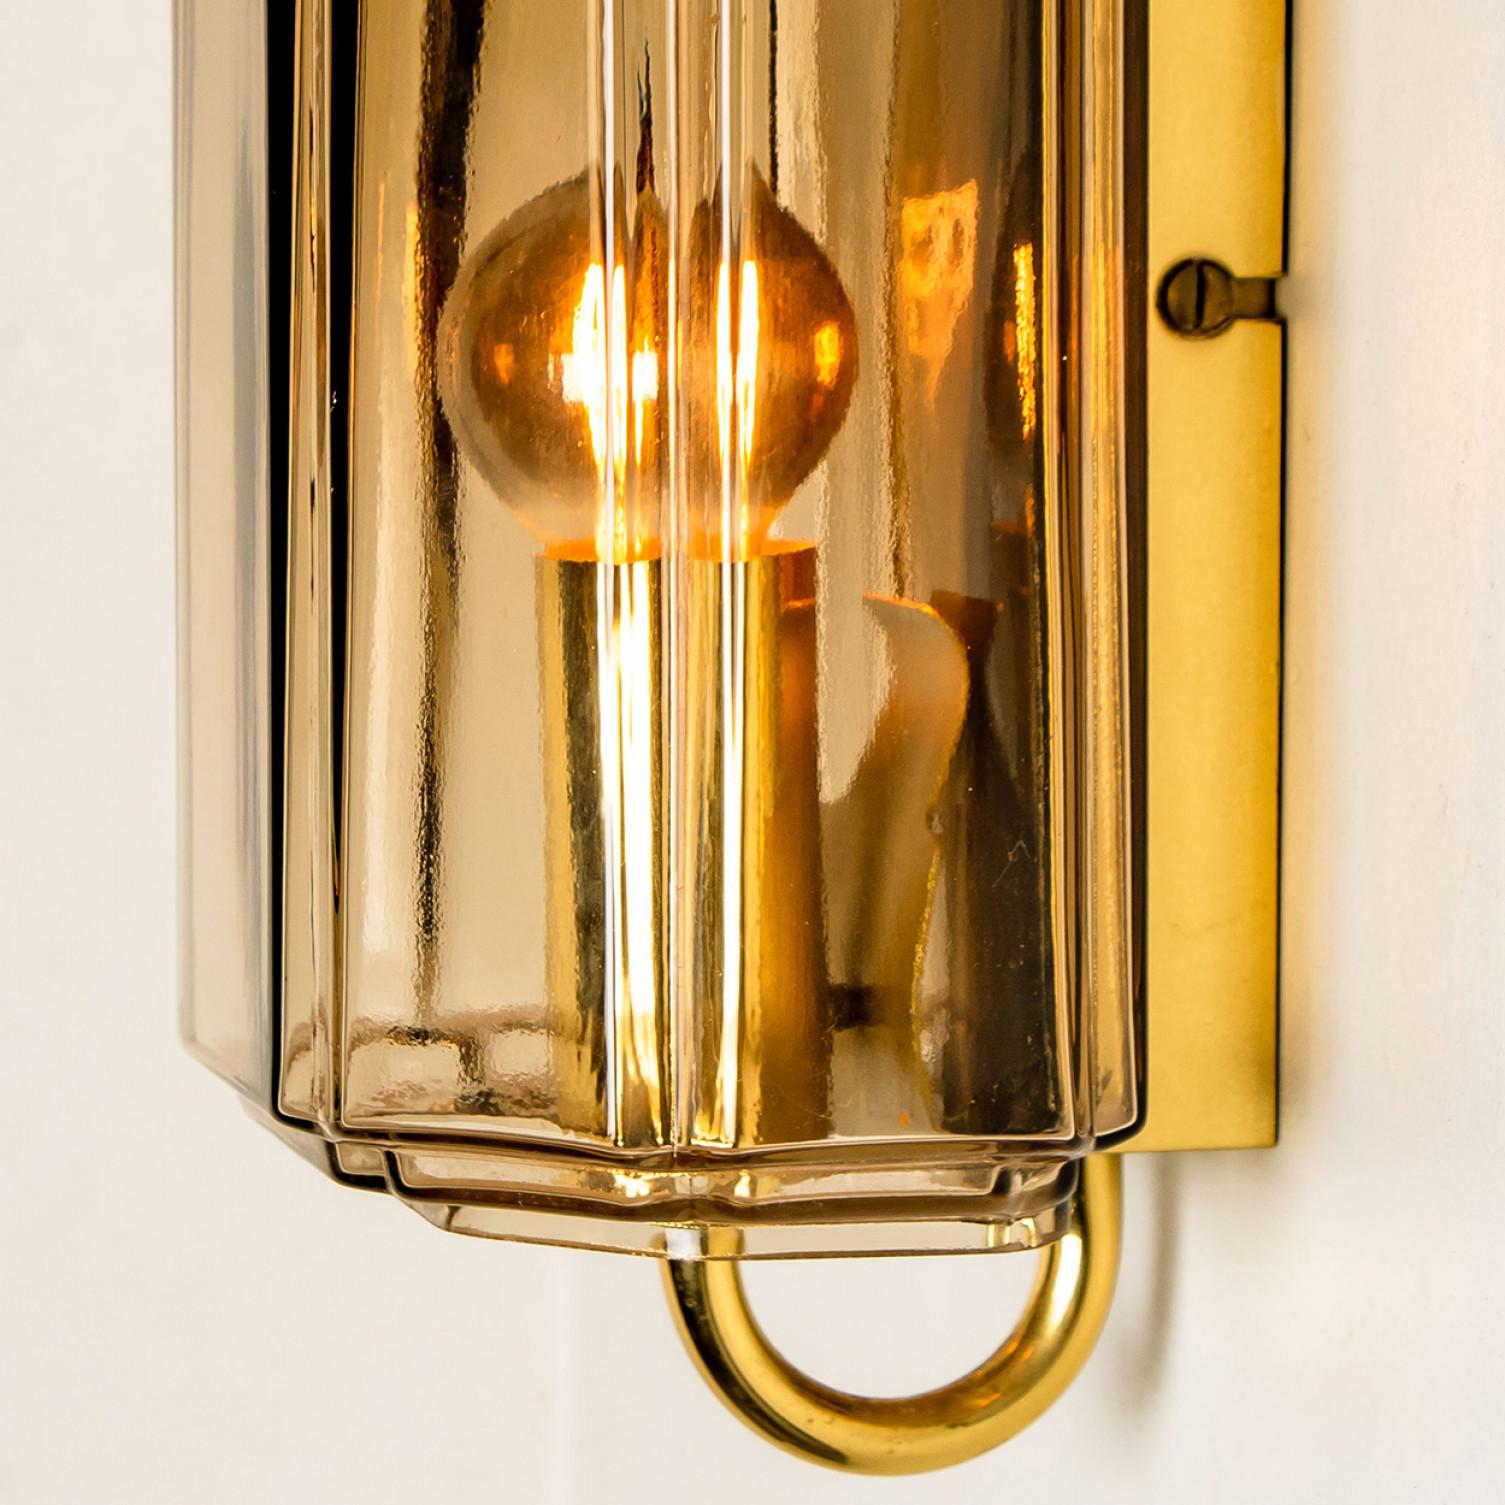 Several Smoked Glass Wall Lights Sconces by Glashütte Limburg, Germany, 1960 For Sale 4